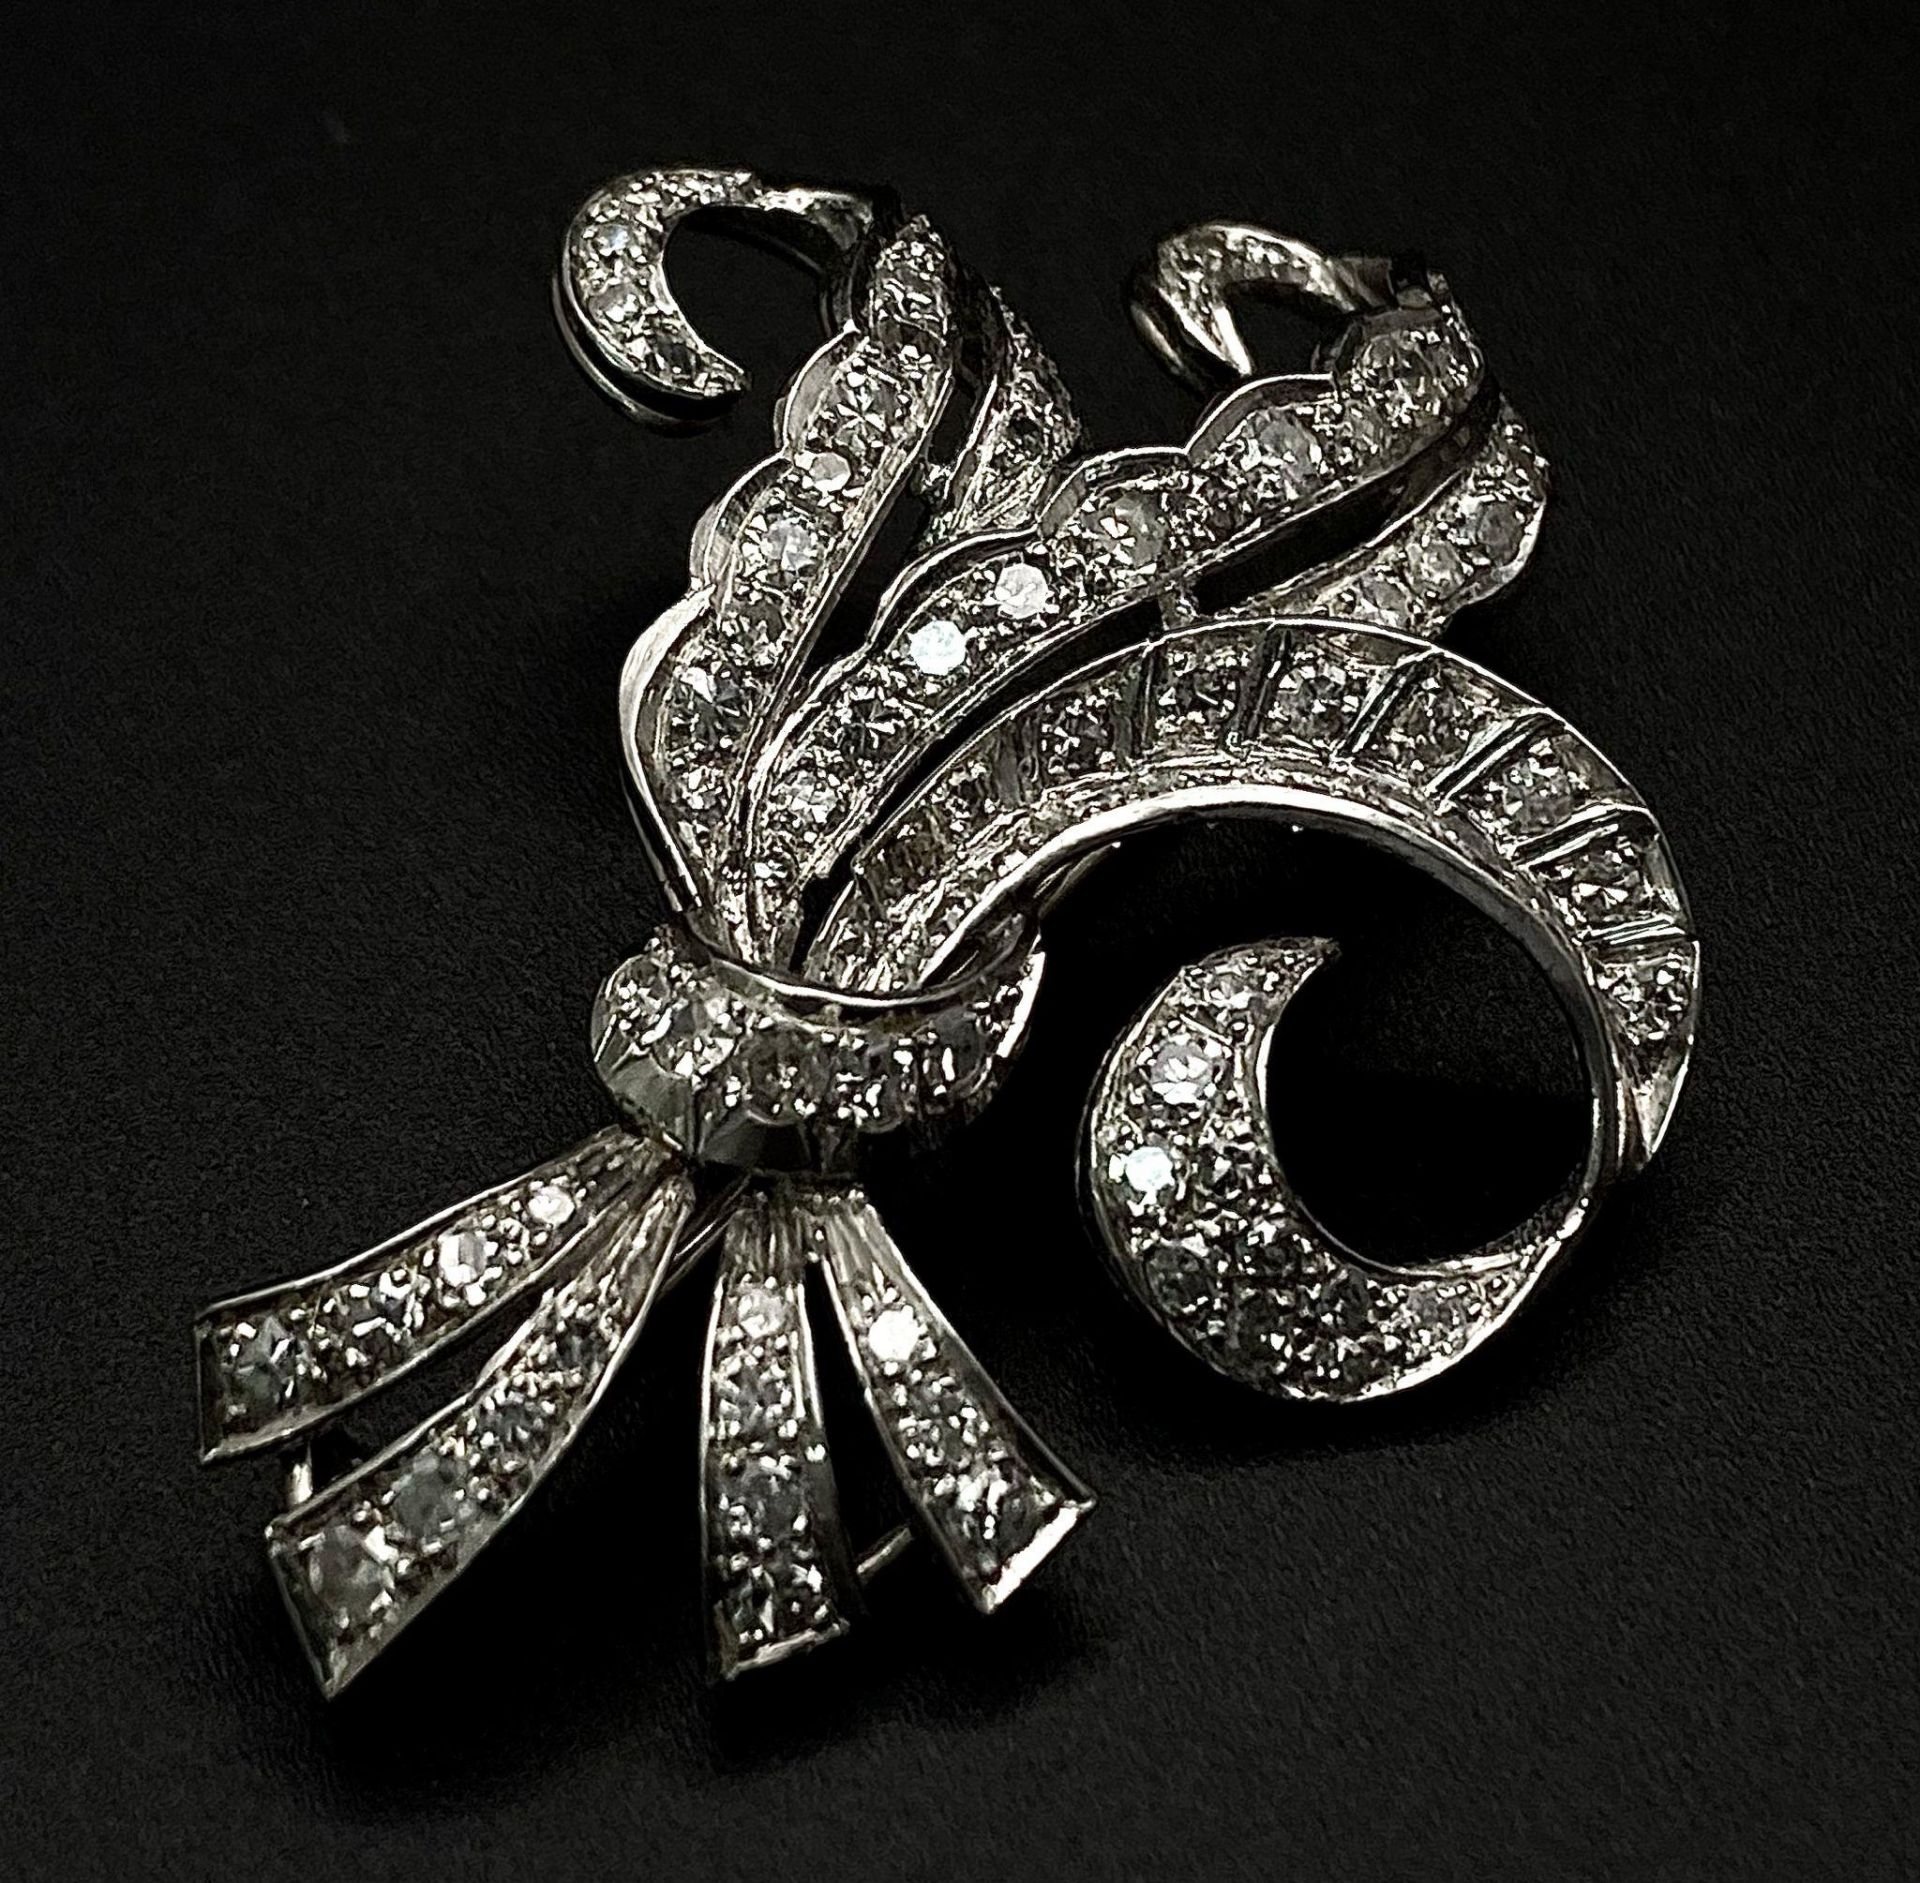 A Vintage Style Platinum and Diamond Elaborate Bow Brooch. 2.2ctw of encrusted diamonds. 10.7g total - Image 5 of 7